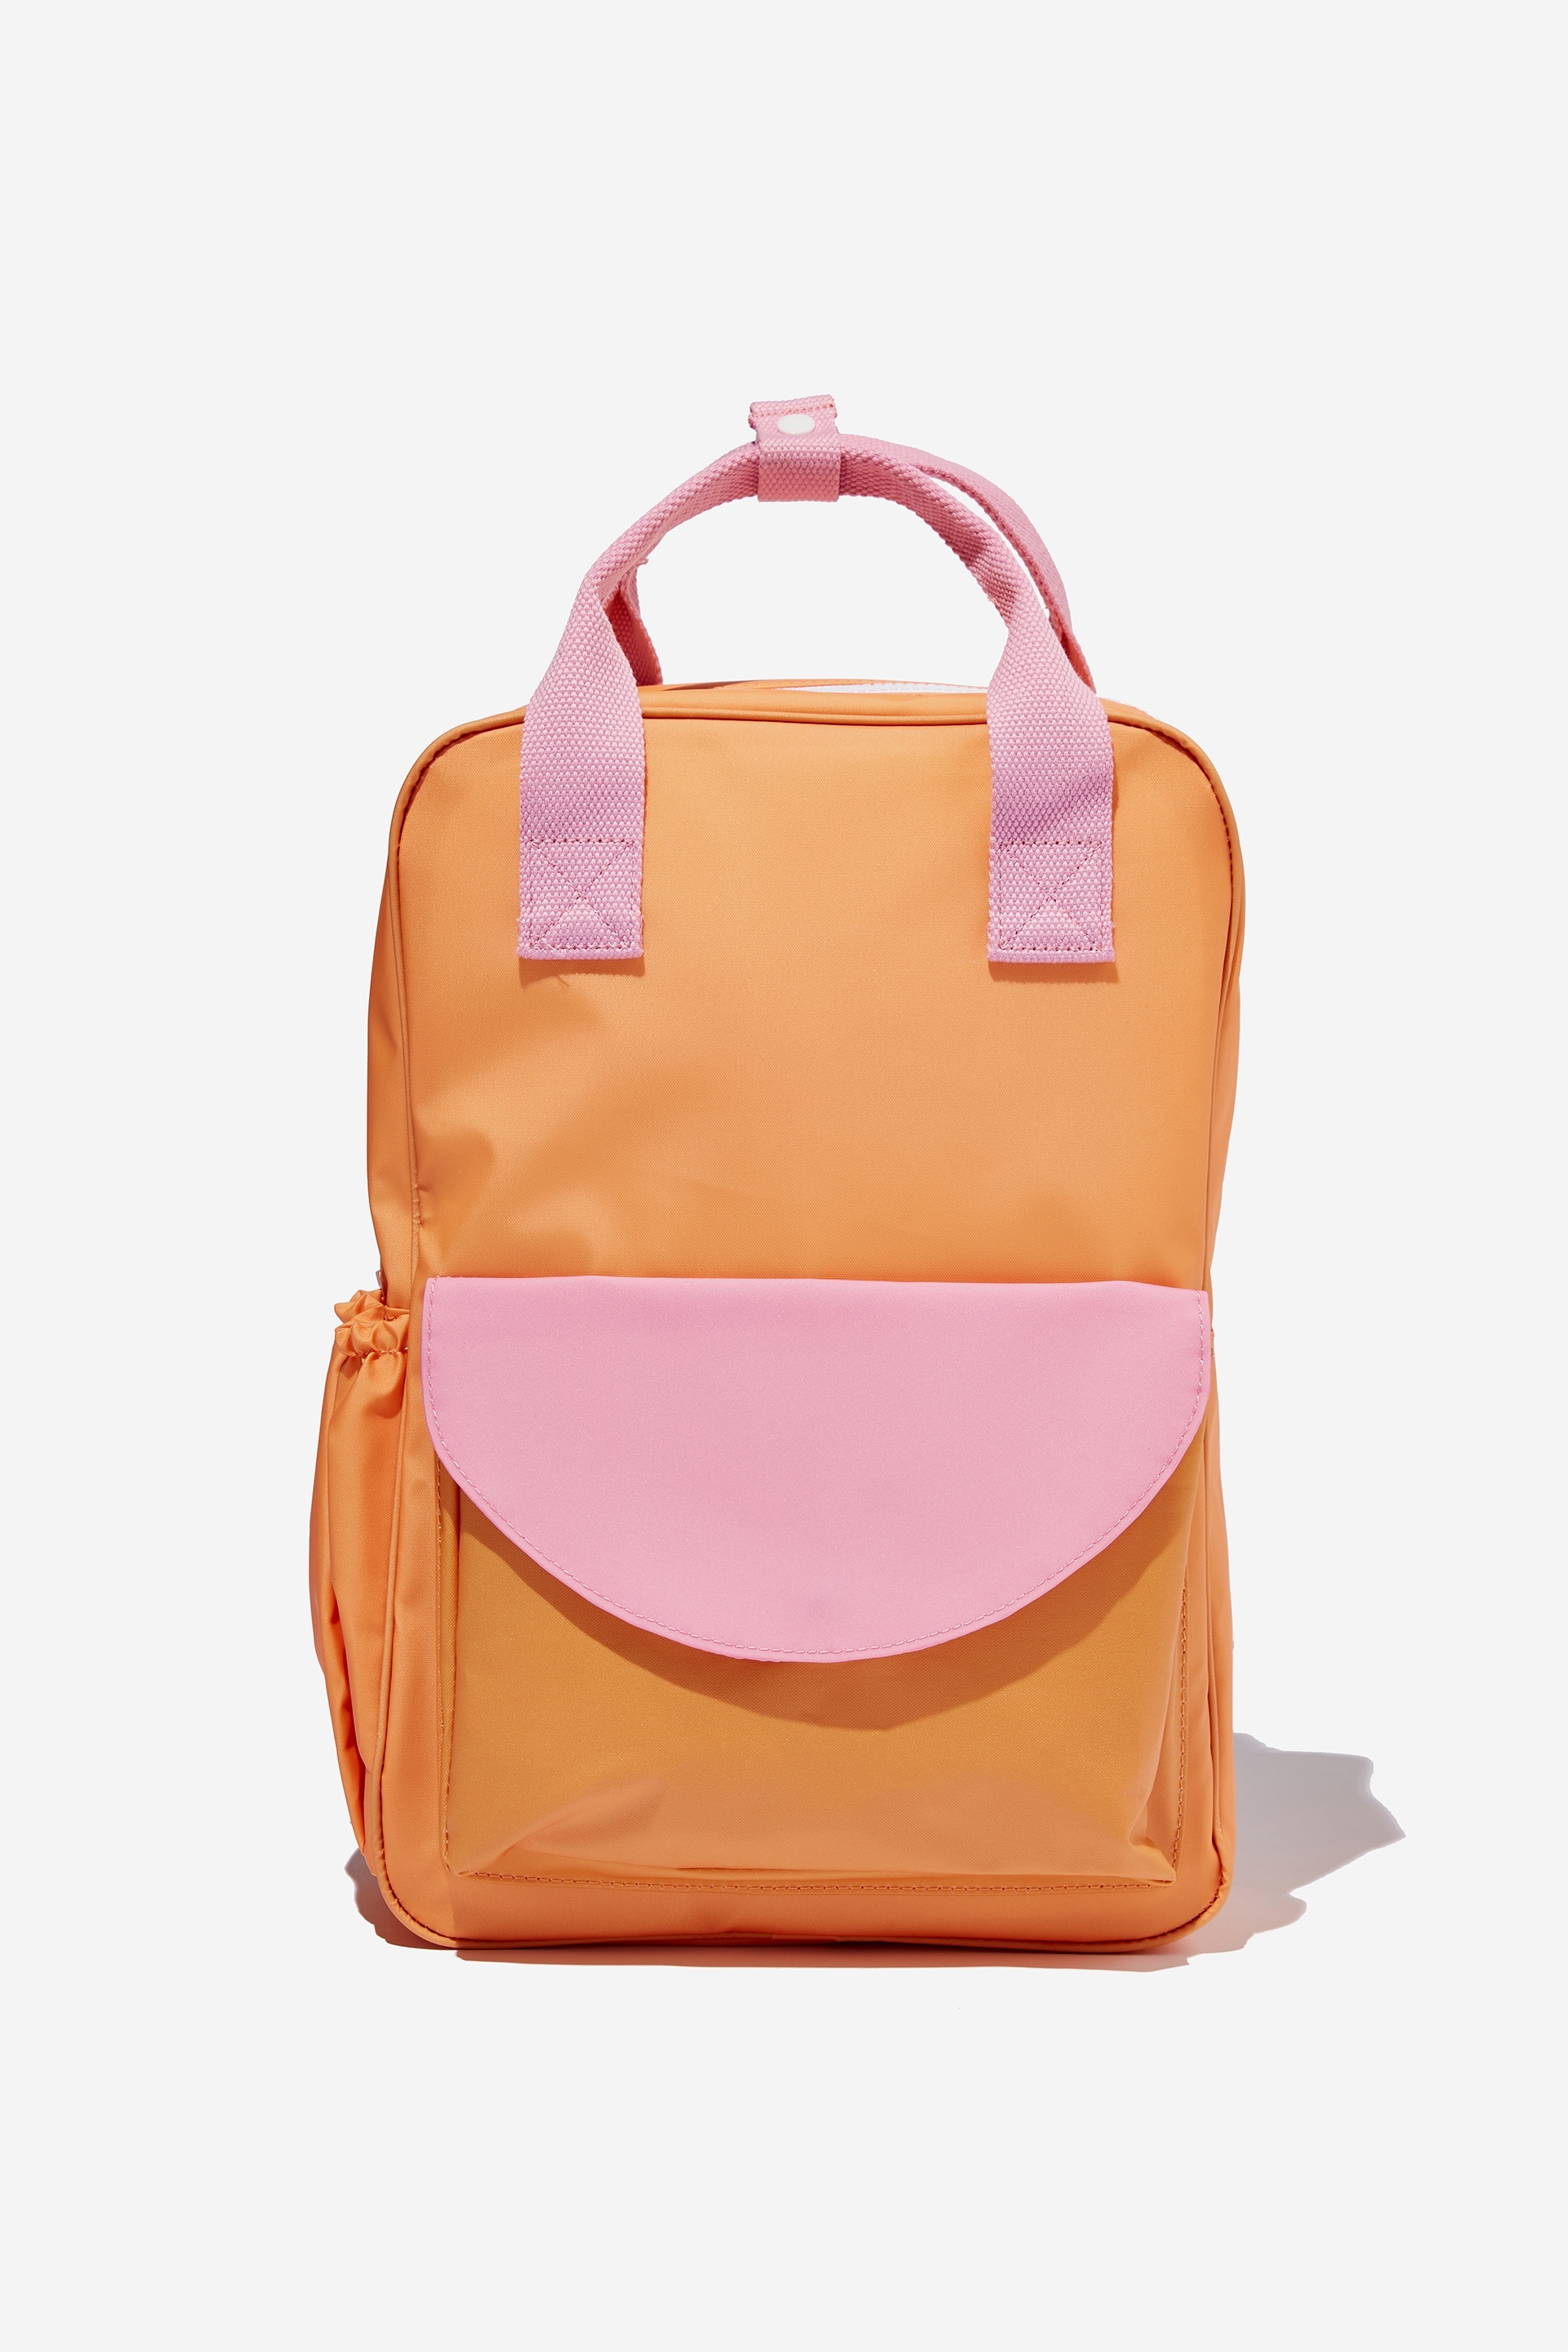 Cotton On Kids - Back To It Backpack - Tumeric latte